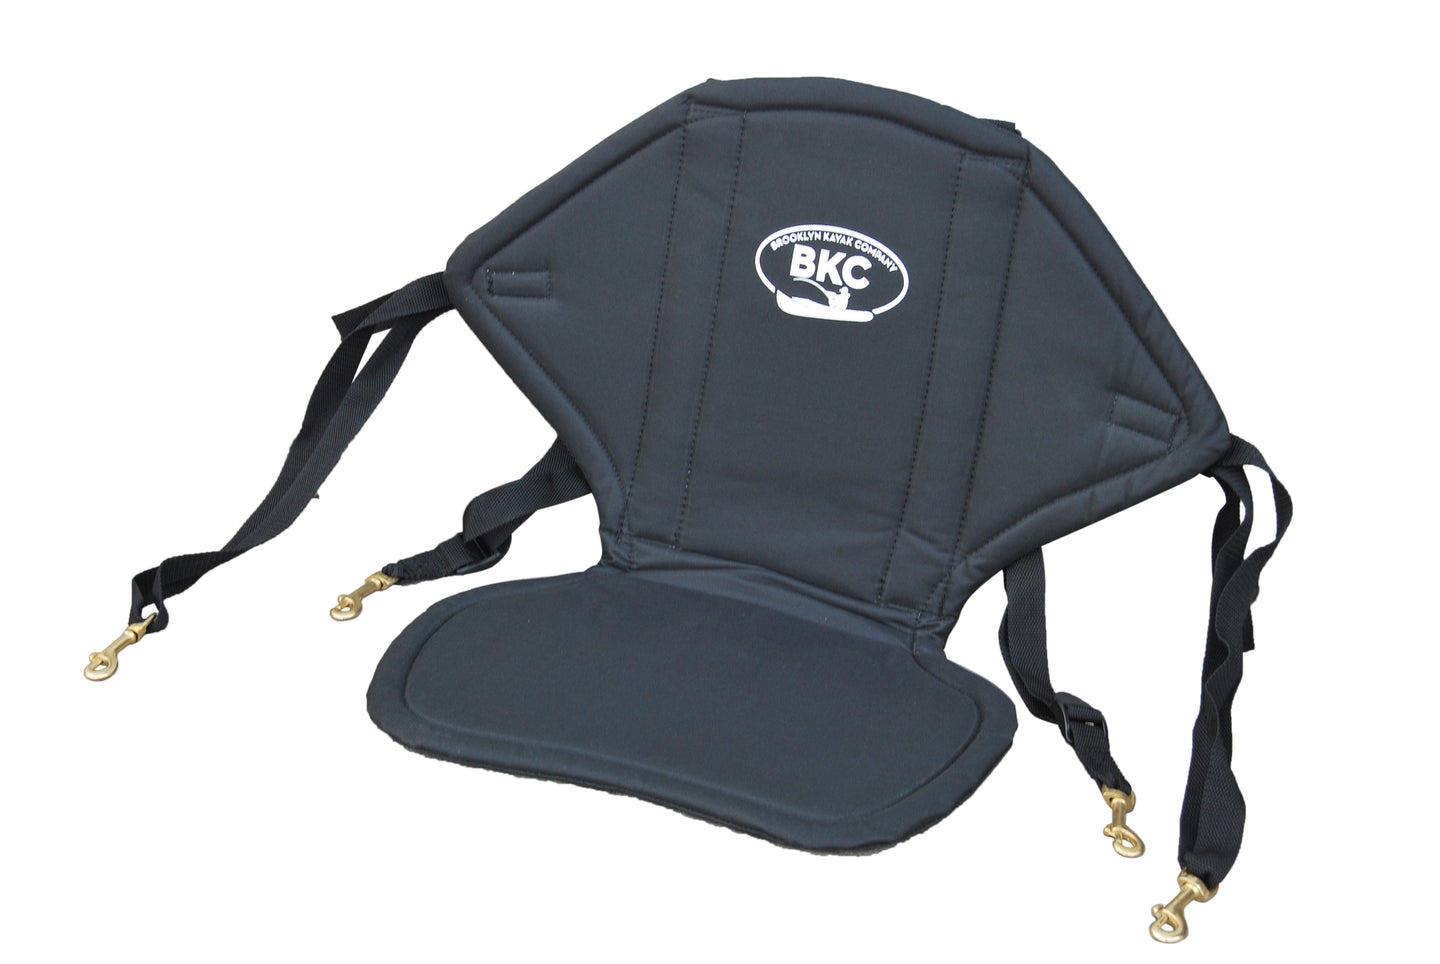 BKC KS222 Universal Sit On Top Kayak Padded Nylon Seat and Backrest with Water Bottle Pouch Included - Brooklyn Kayak Company